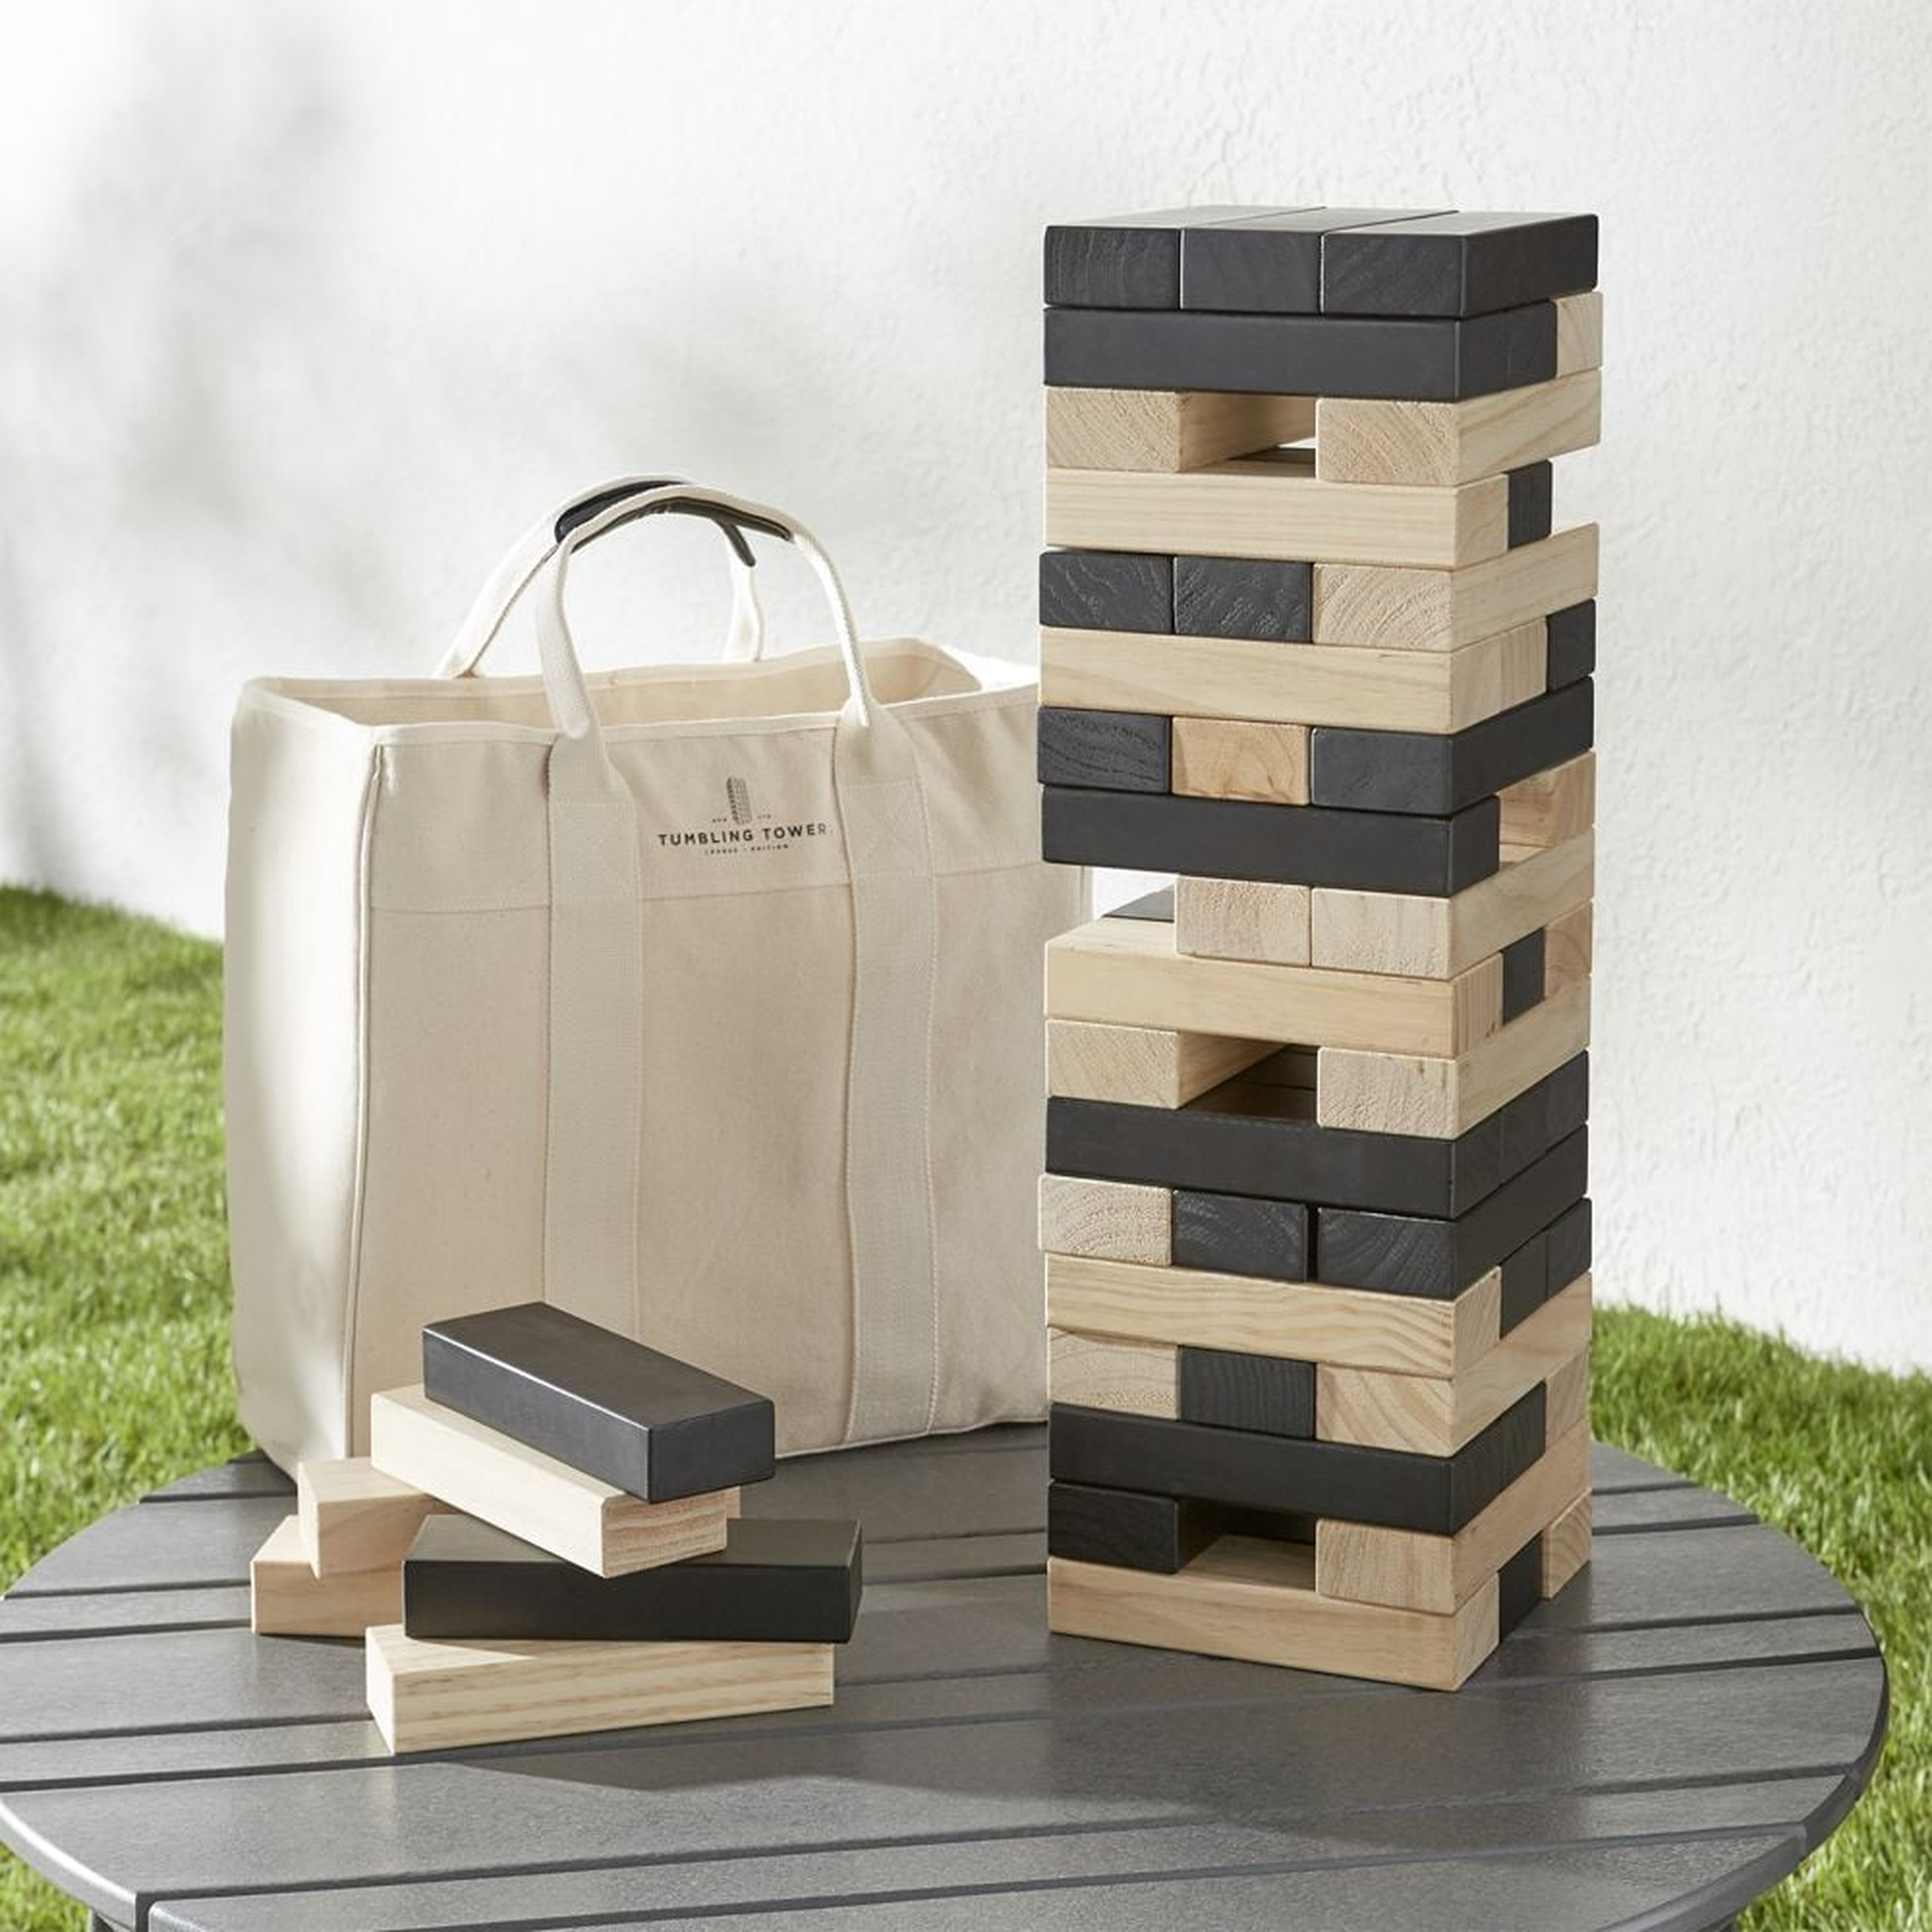 Oversized Tumbling Tower Yard Game 27" - Crate and Barrel